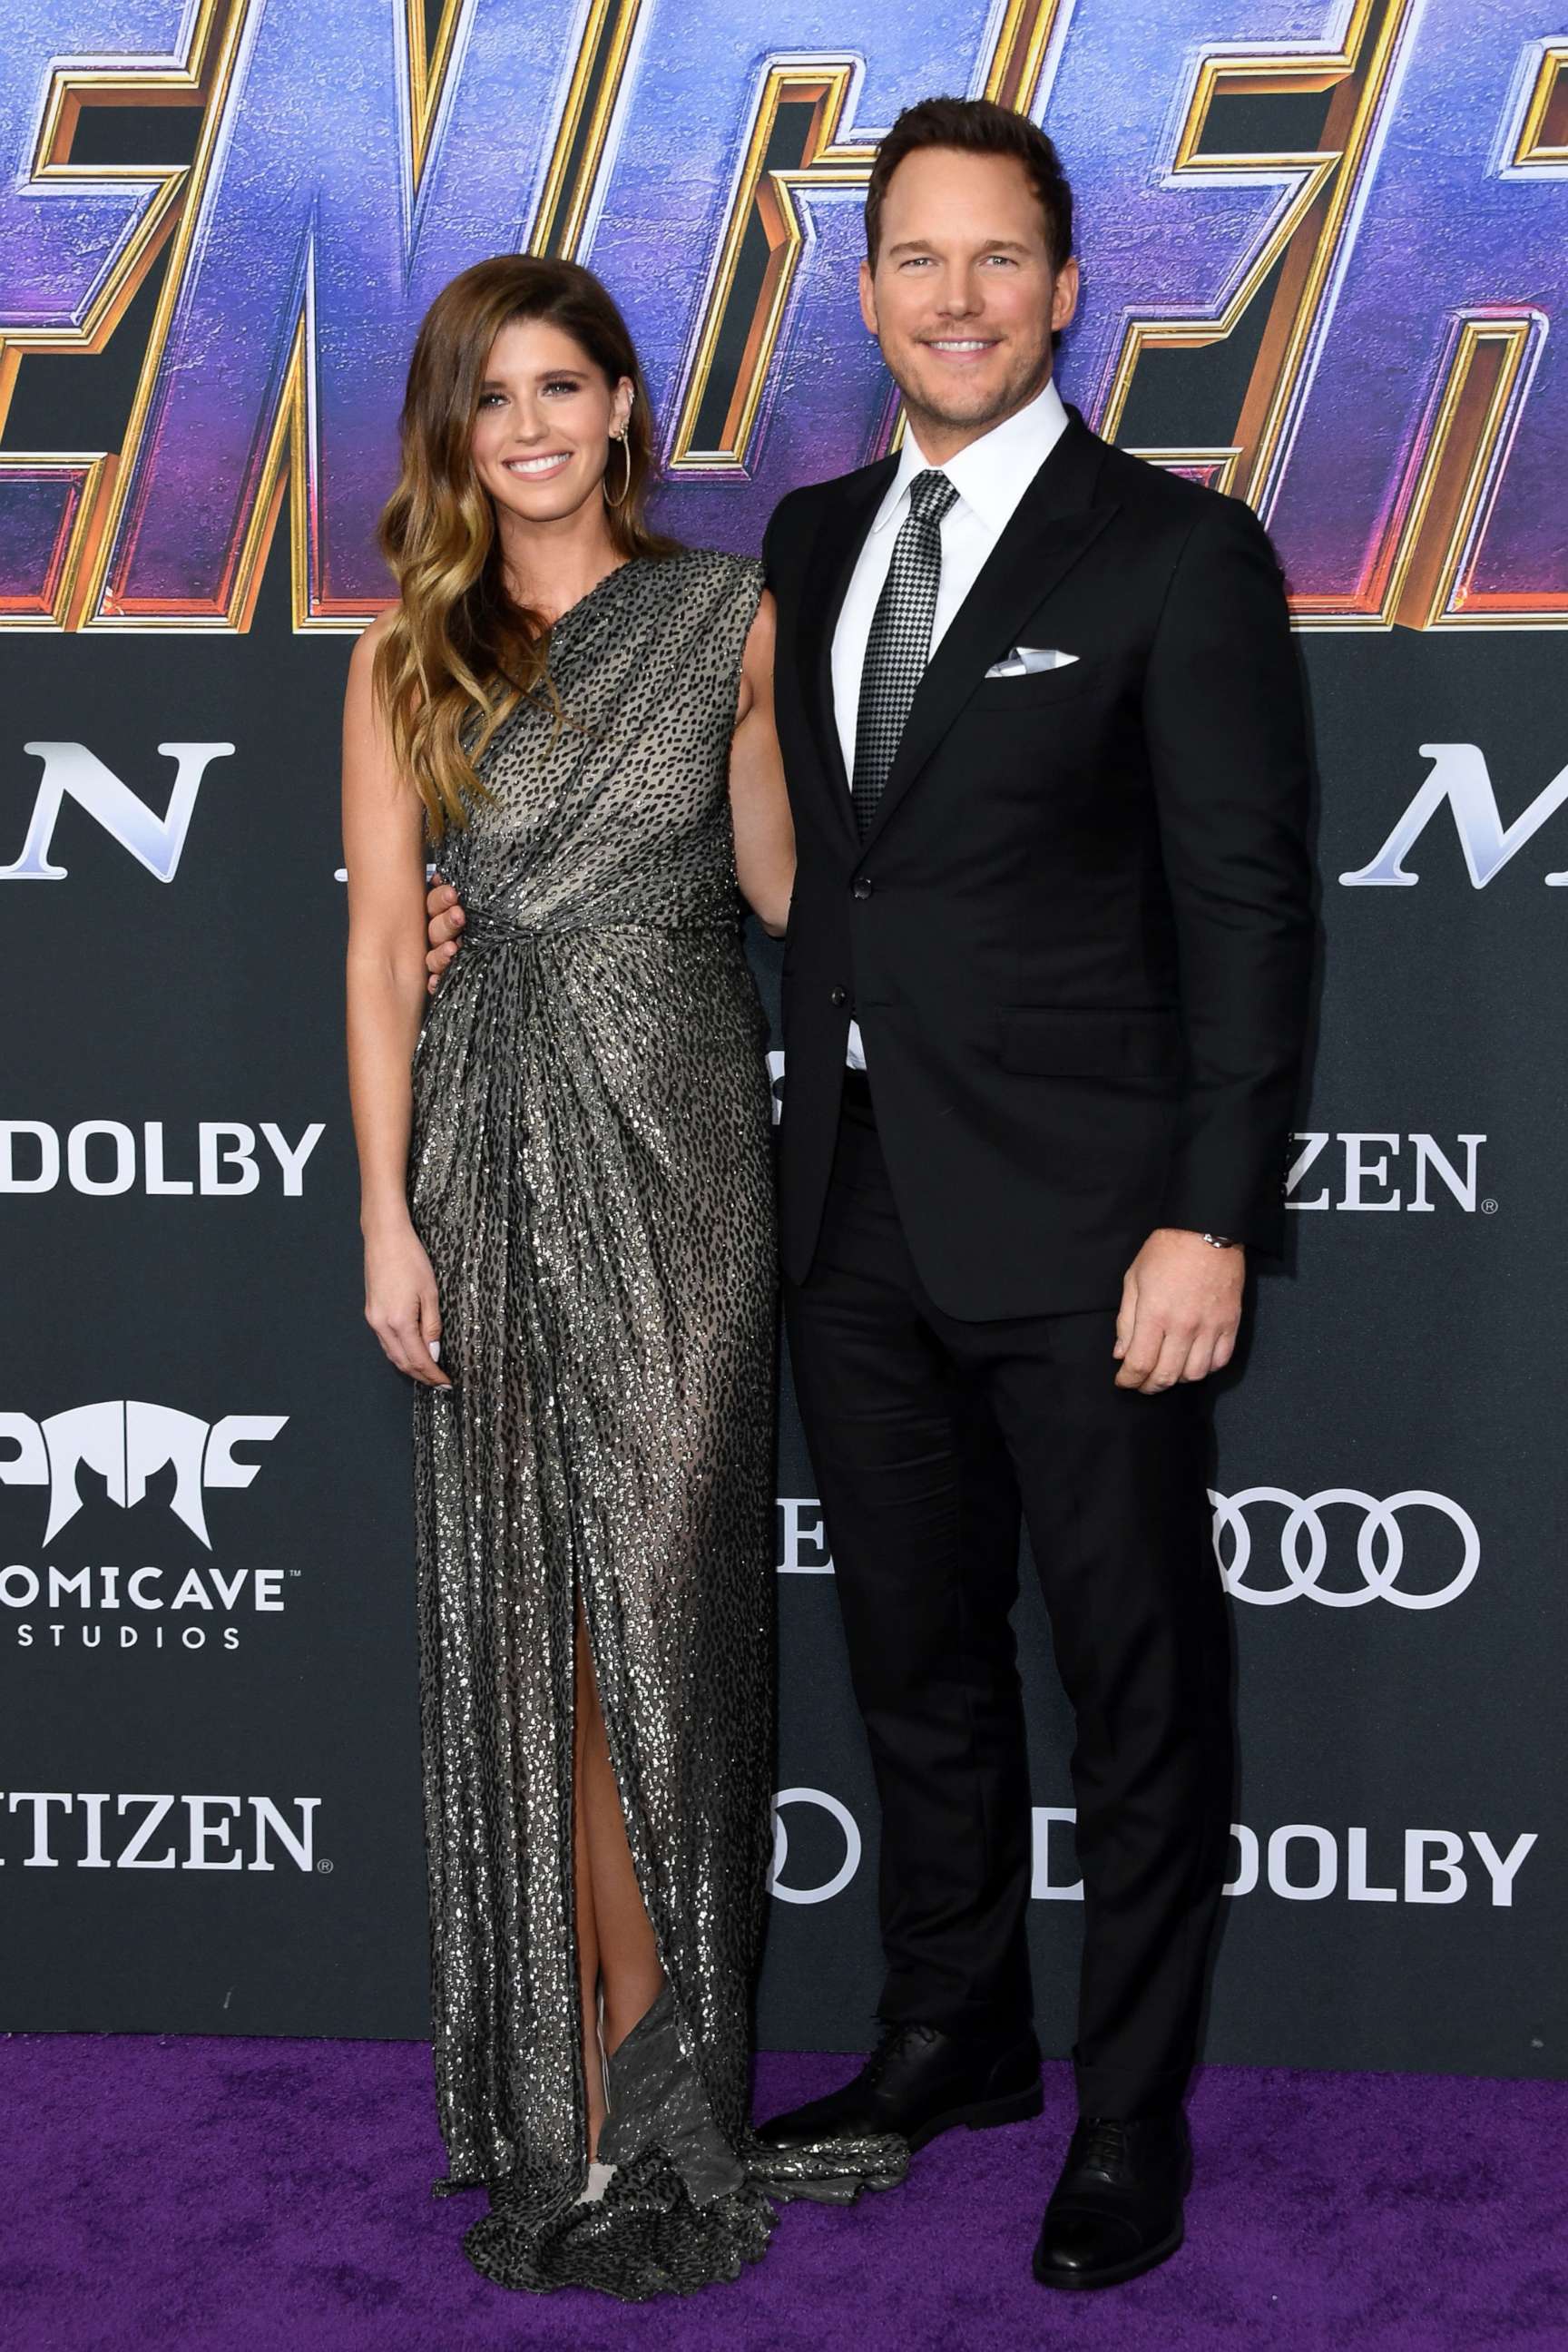 PHOTO: Chris Pratt and Katherine Schwarzenegger arrive for the World premiere of Marvel Studios' "Avengers: Endgame" at the Los Angeles Convention Center on April 22, 2019 in Los Angeles.